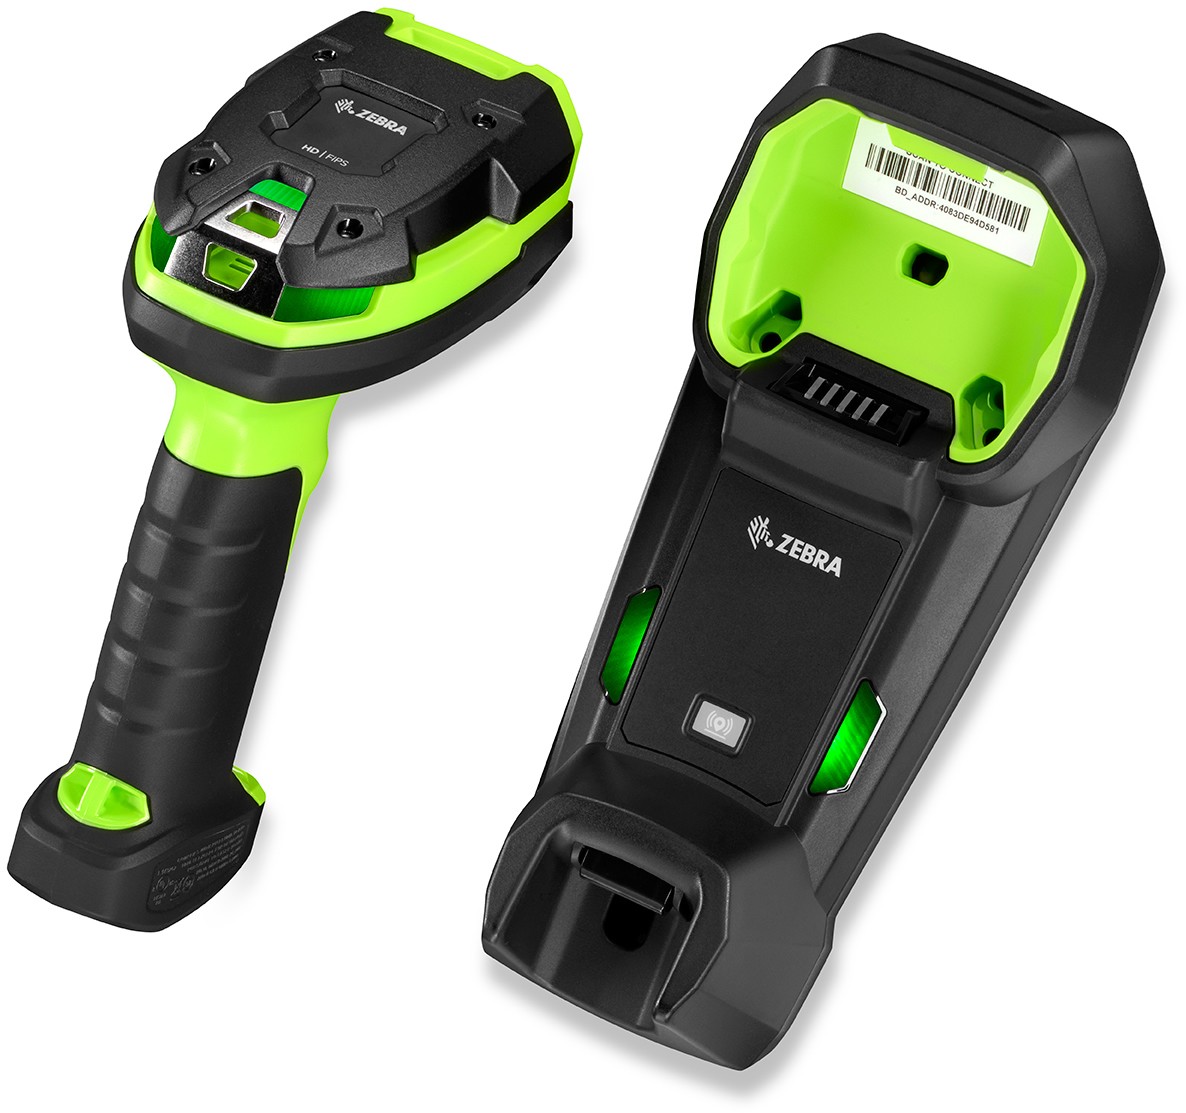 DS3678-ER Rugged Green Standard Cradle USB Kit - India and Korea: DS3608-ER20003VZK Scanner, CBA-U42-S07PAR Shielded USB Cable Supports 12V P/S, STB3678-C100F3WW Cradle, PWR-BGA12V50W0WW Power Supply and CBL-DC-451A1-01 DC Line Cord